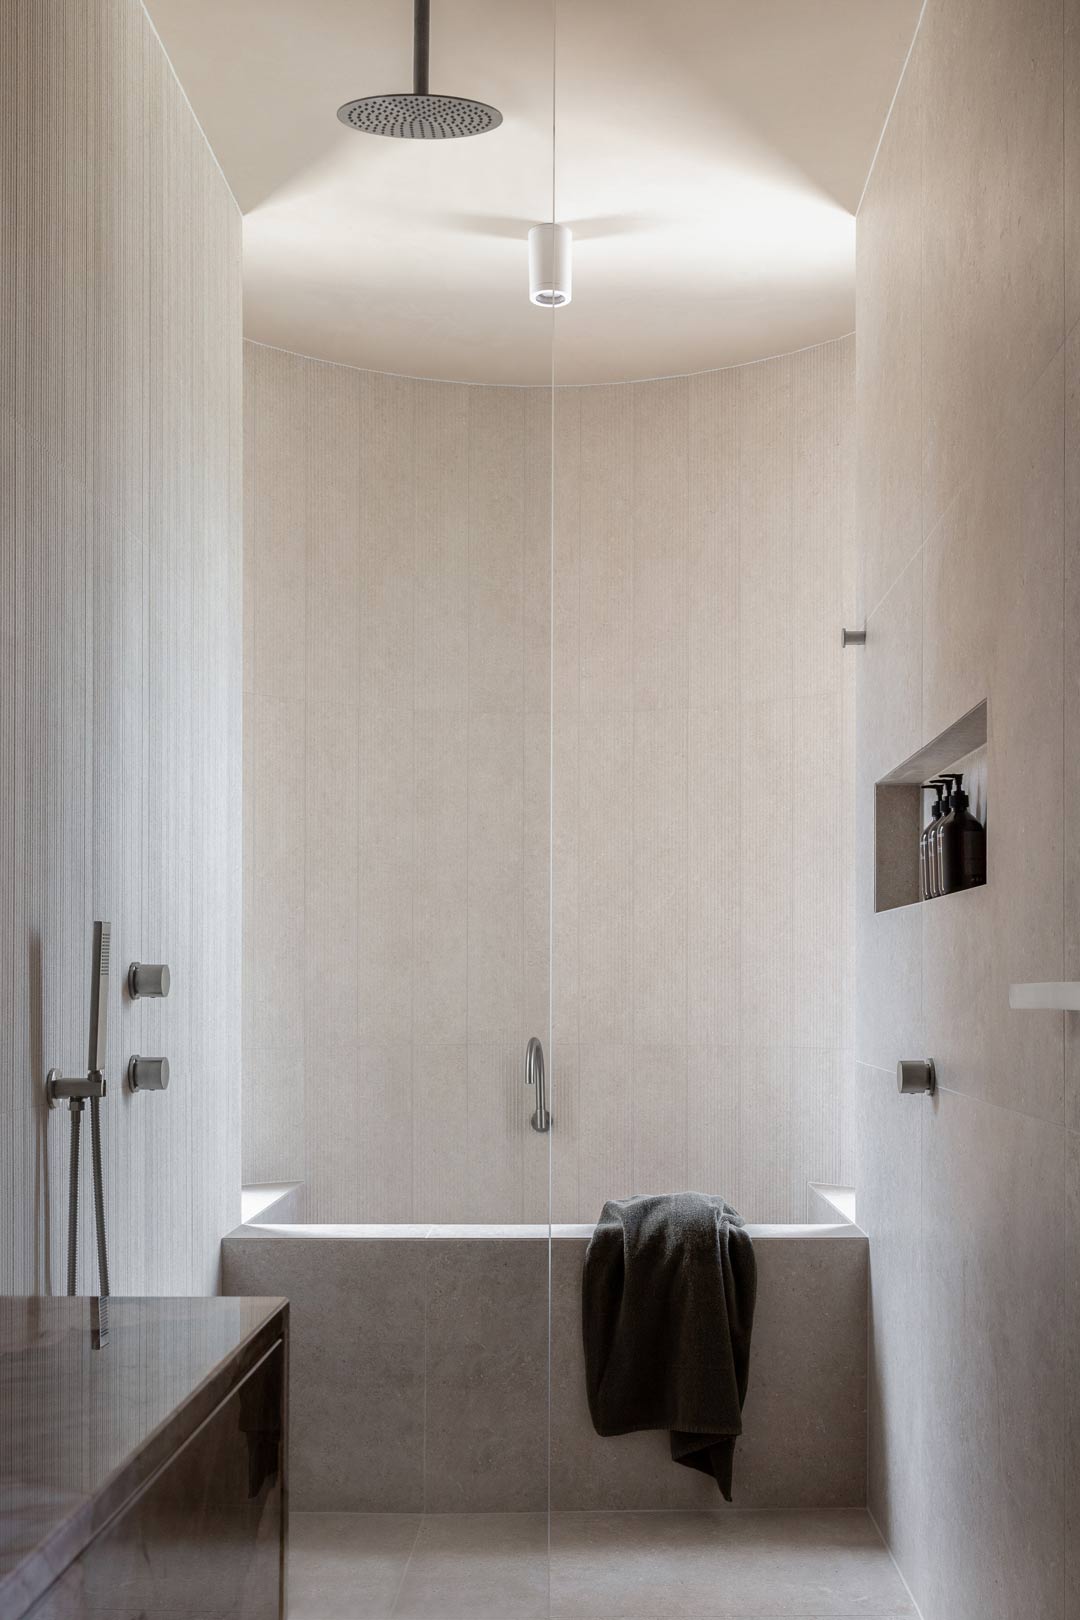 A spa like bathroom with a ceiling shower dropper and a built in concrete bath